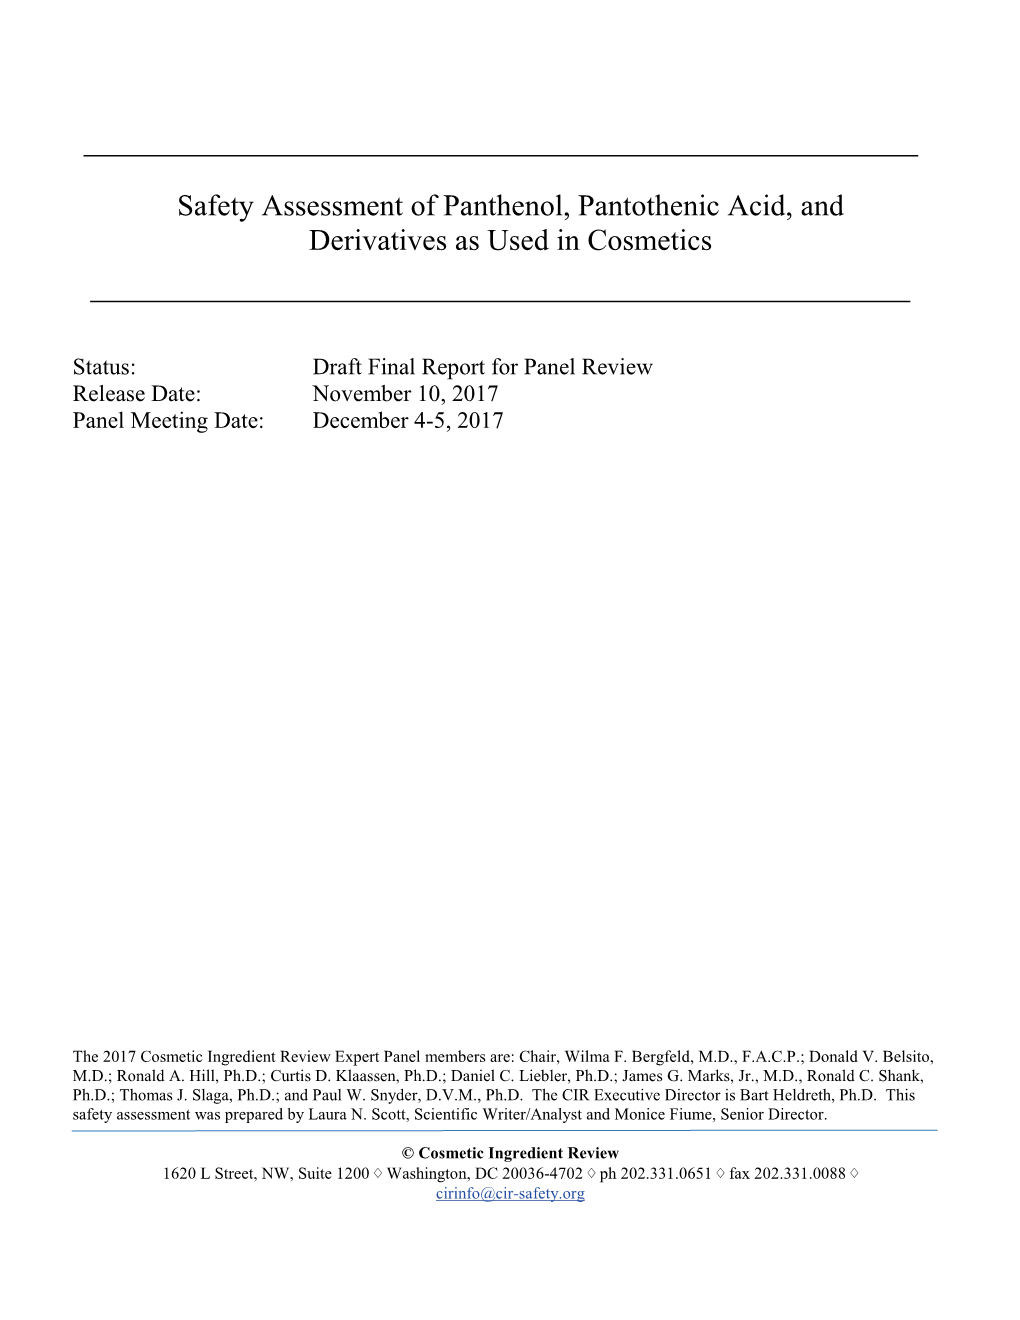 Safety Assessment of Panthenol, Pantothenic Acid, and Derivatives As Used in Cosmetics